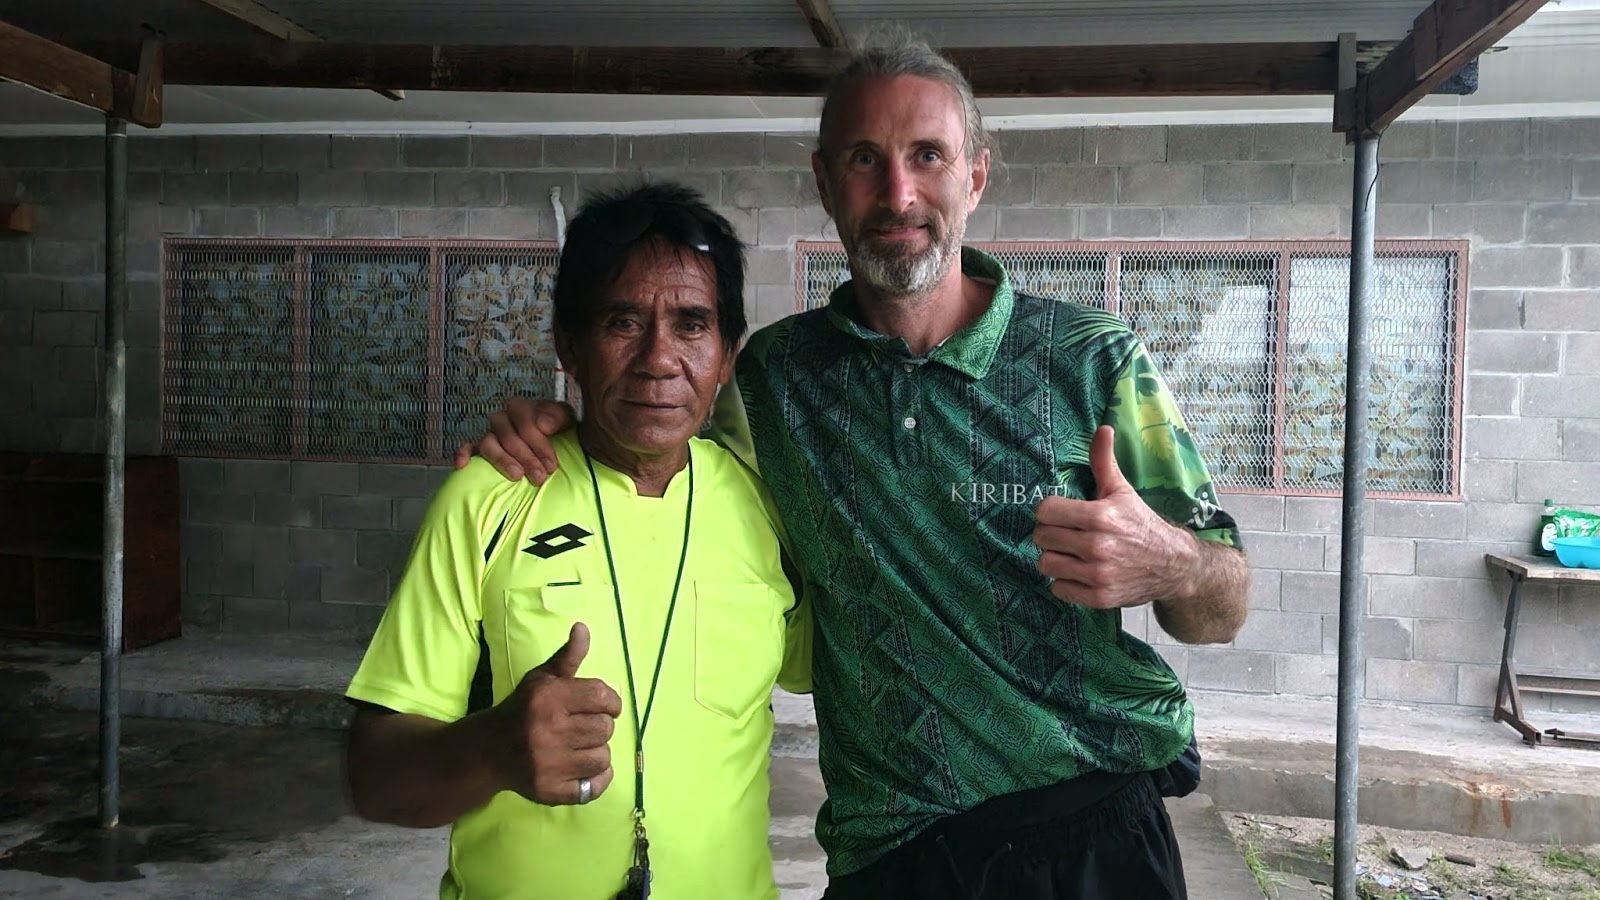 Pine is the national coach, vice-mayor of Betio and was a great help to organize our acitivities